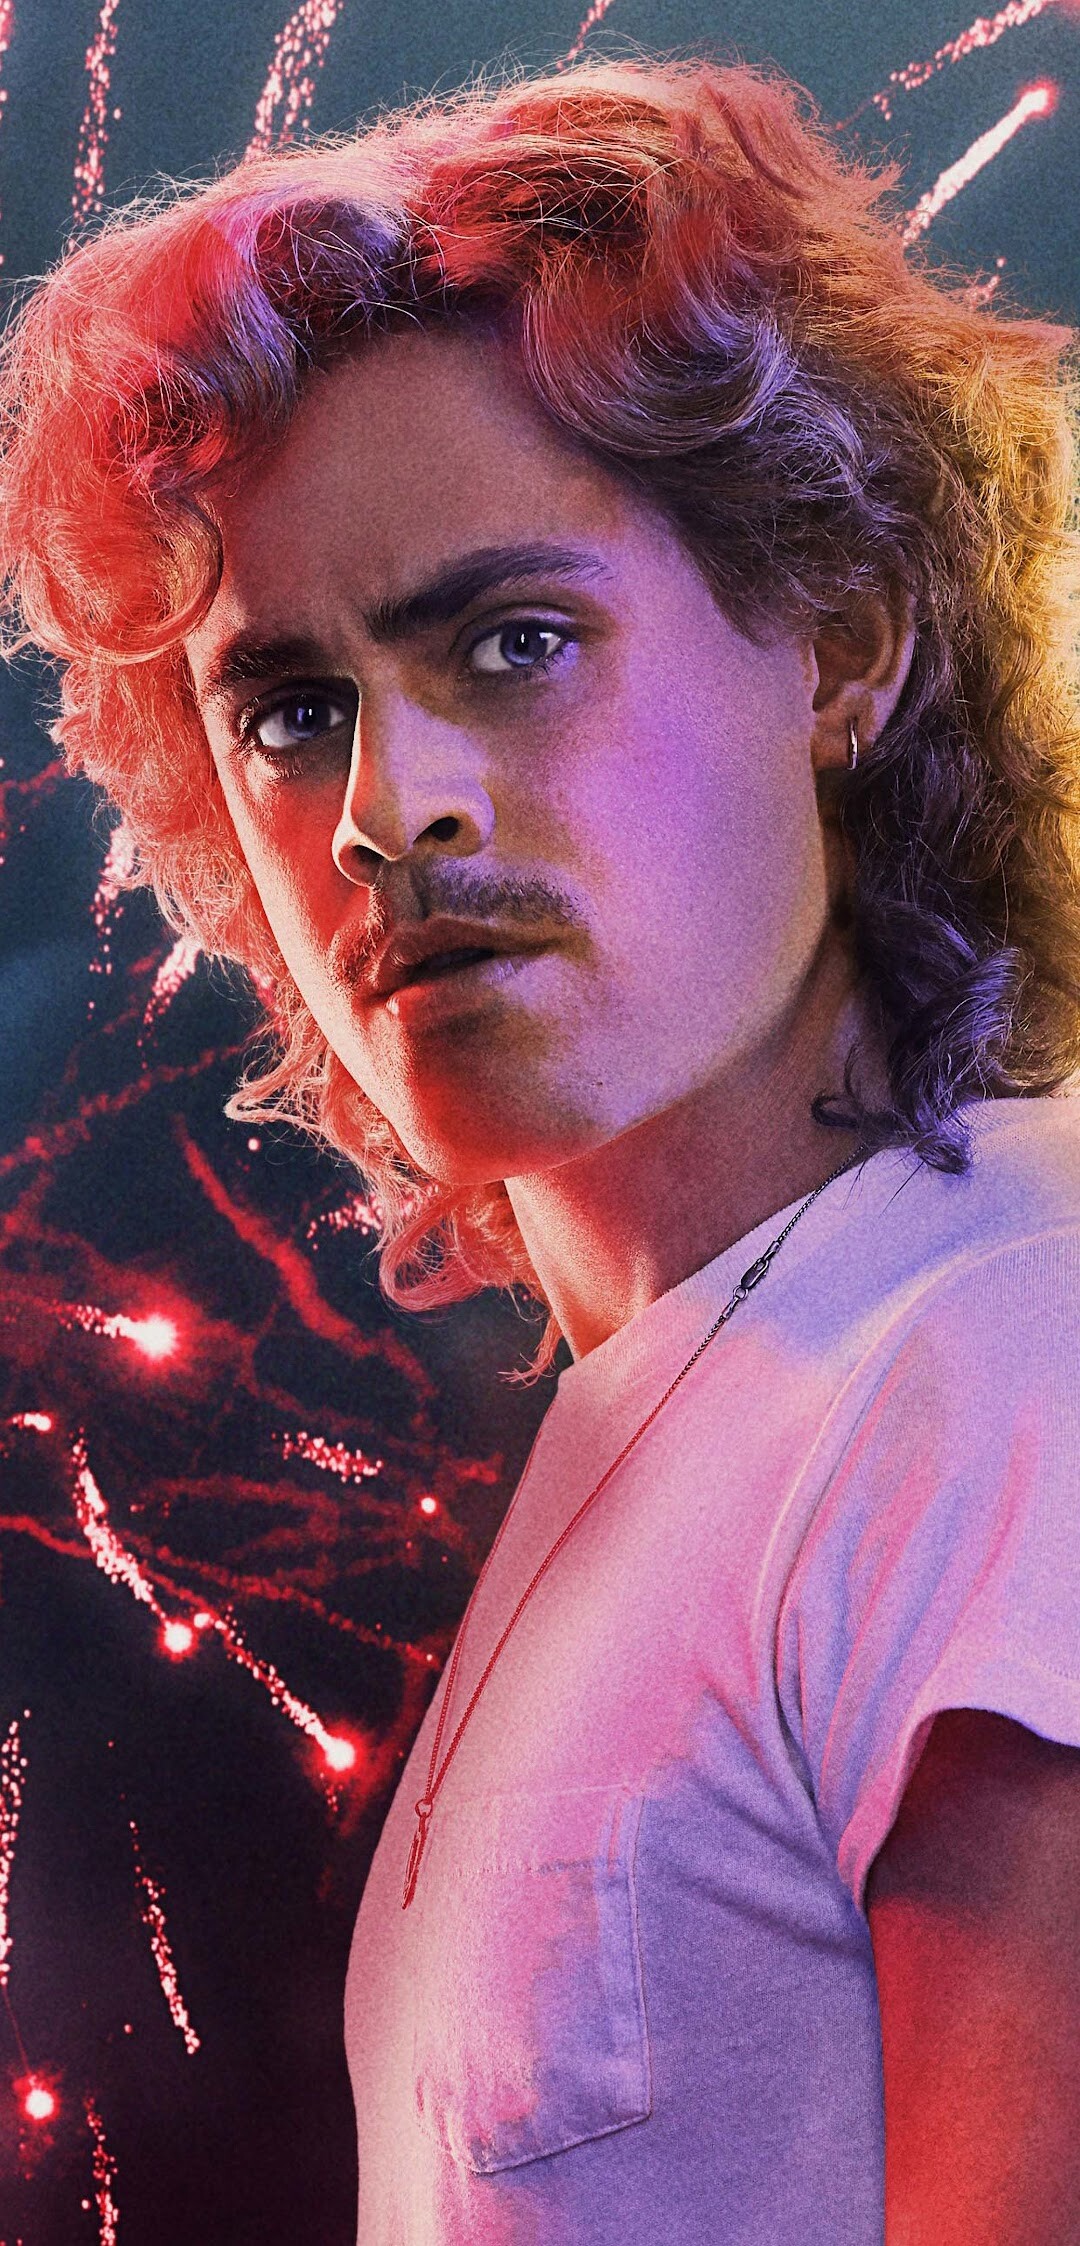 Stranger Things: Season 3 Billy Hargrove, portrayed by Dacre Montgomery. 1080x2250 HD Wallpaper.